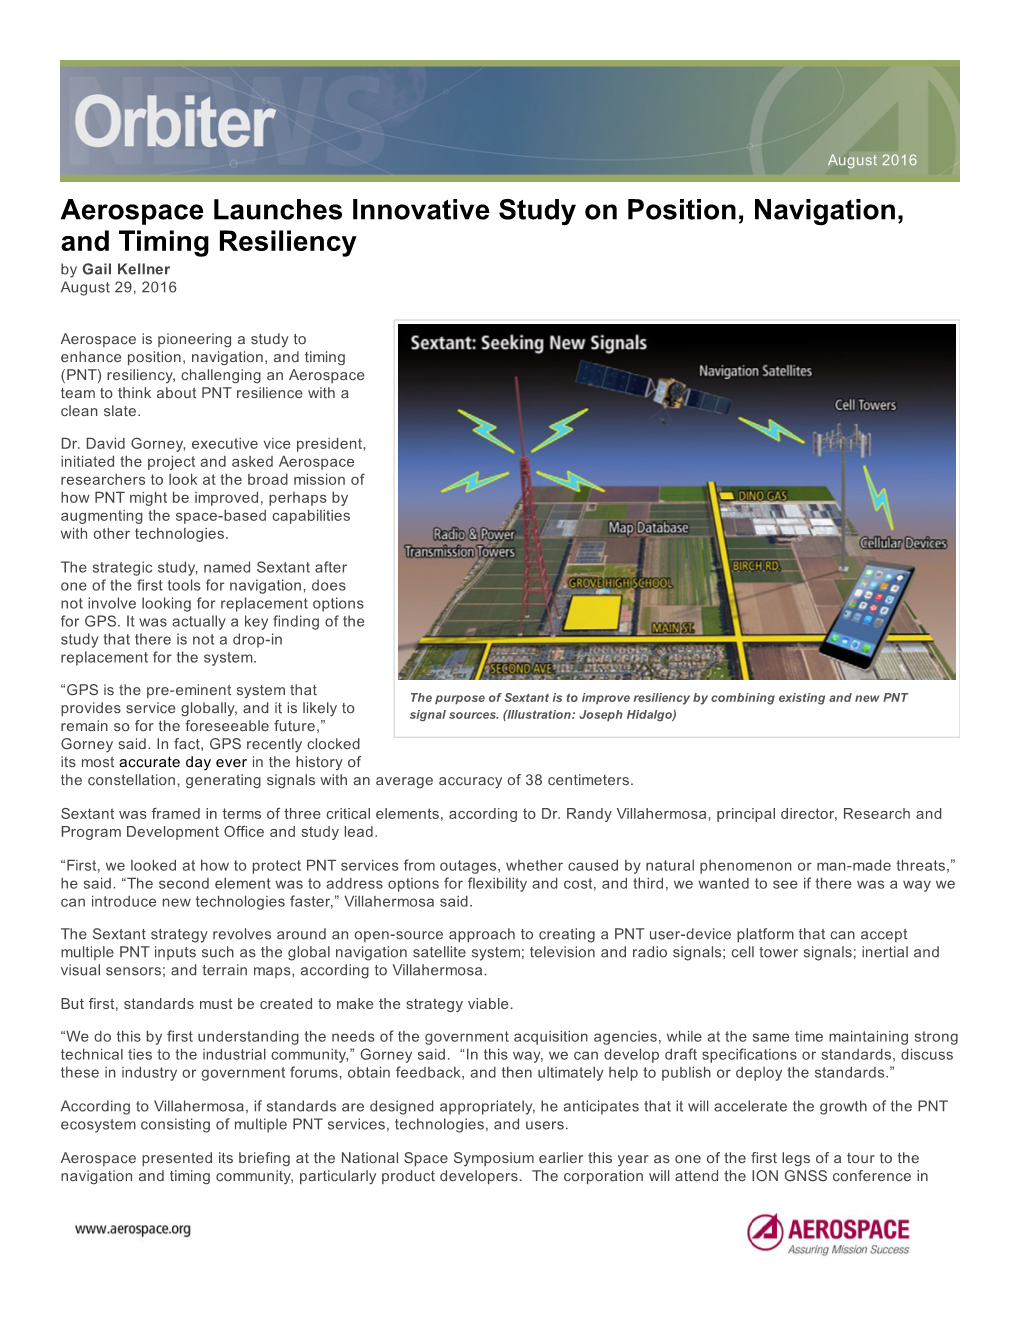 Aerospace Launches Innovative Study on Position, Navigation, and Timing Resiliency by Gail Kellner August 29, 2016